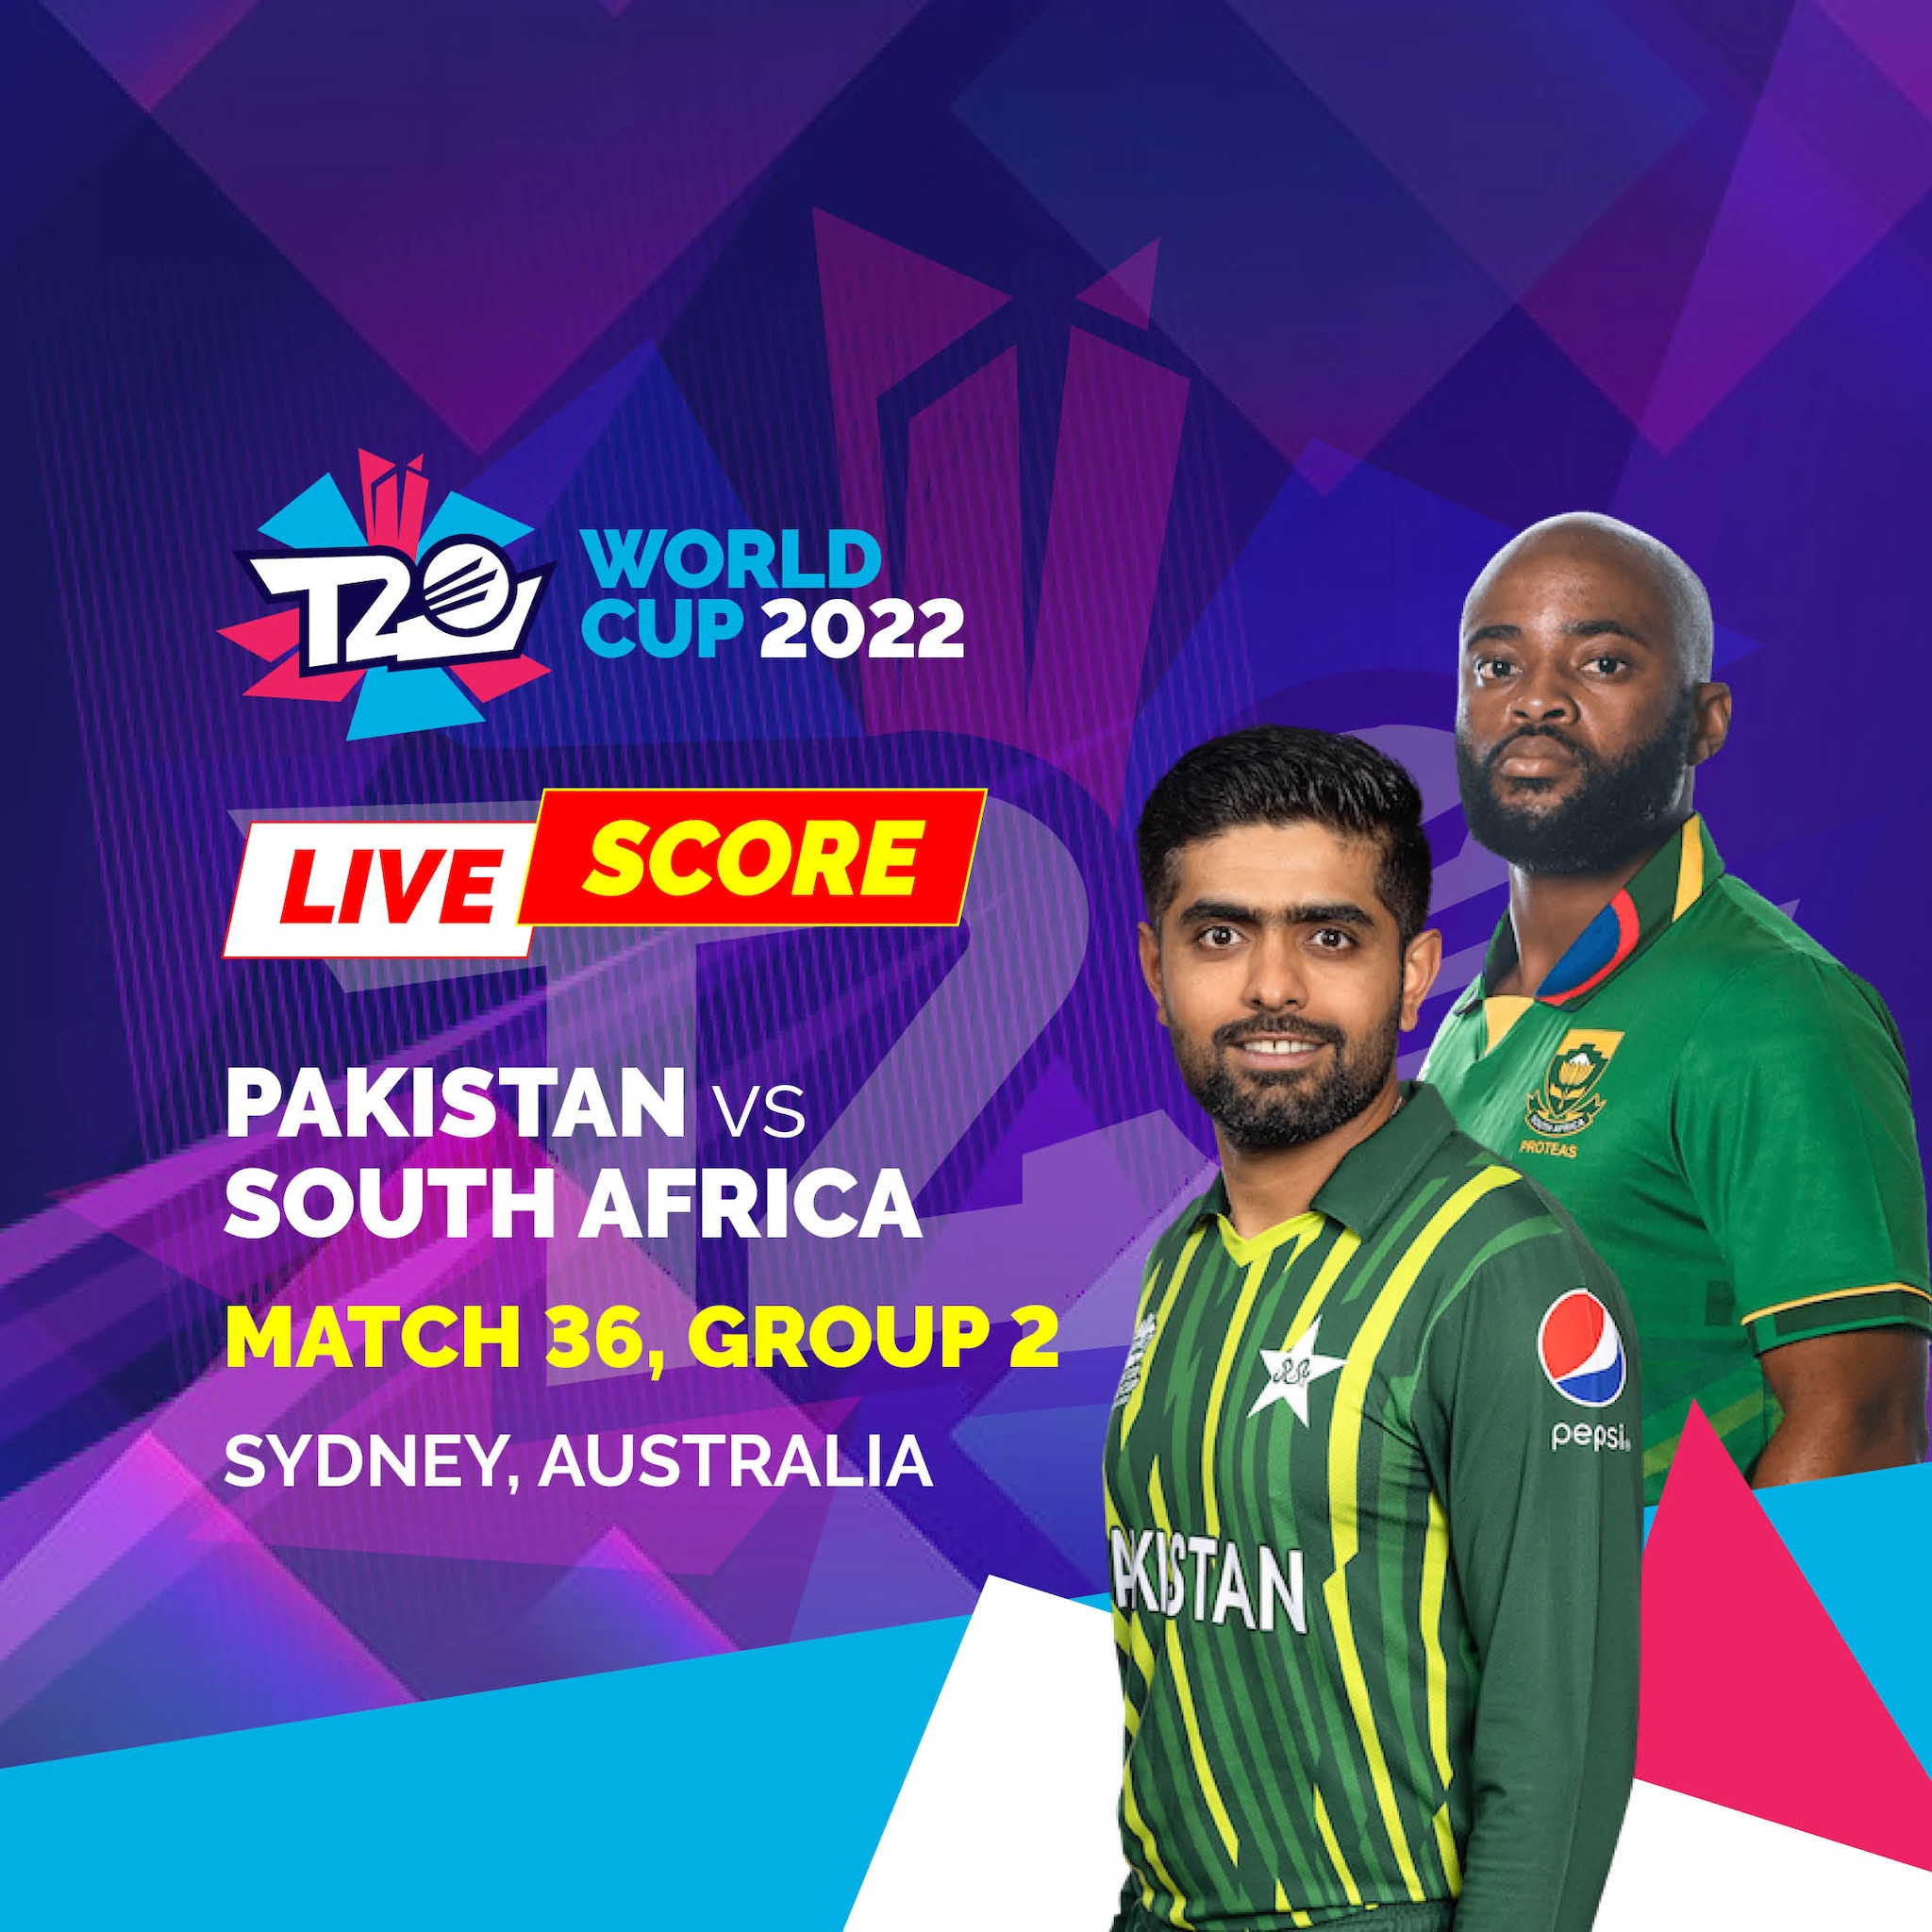 Pakistan vs South Africa Highlights, T20 World Cup 2022 PAK Beat SA by 33 Runs to Stay Alive in Semifinals Race